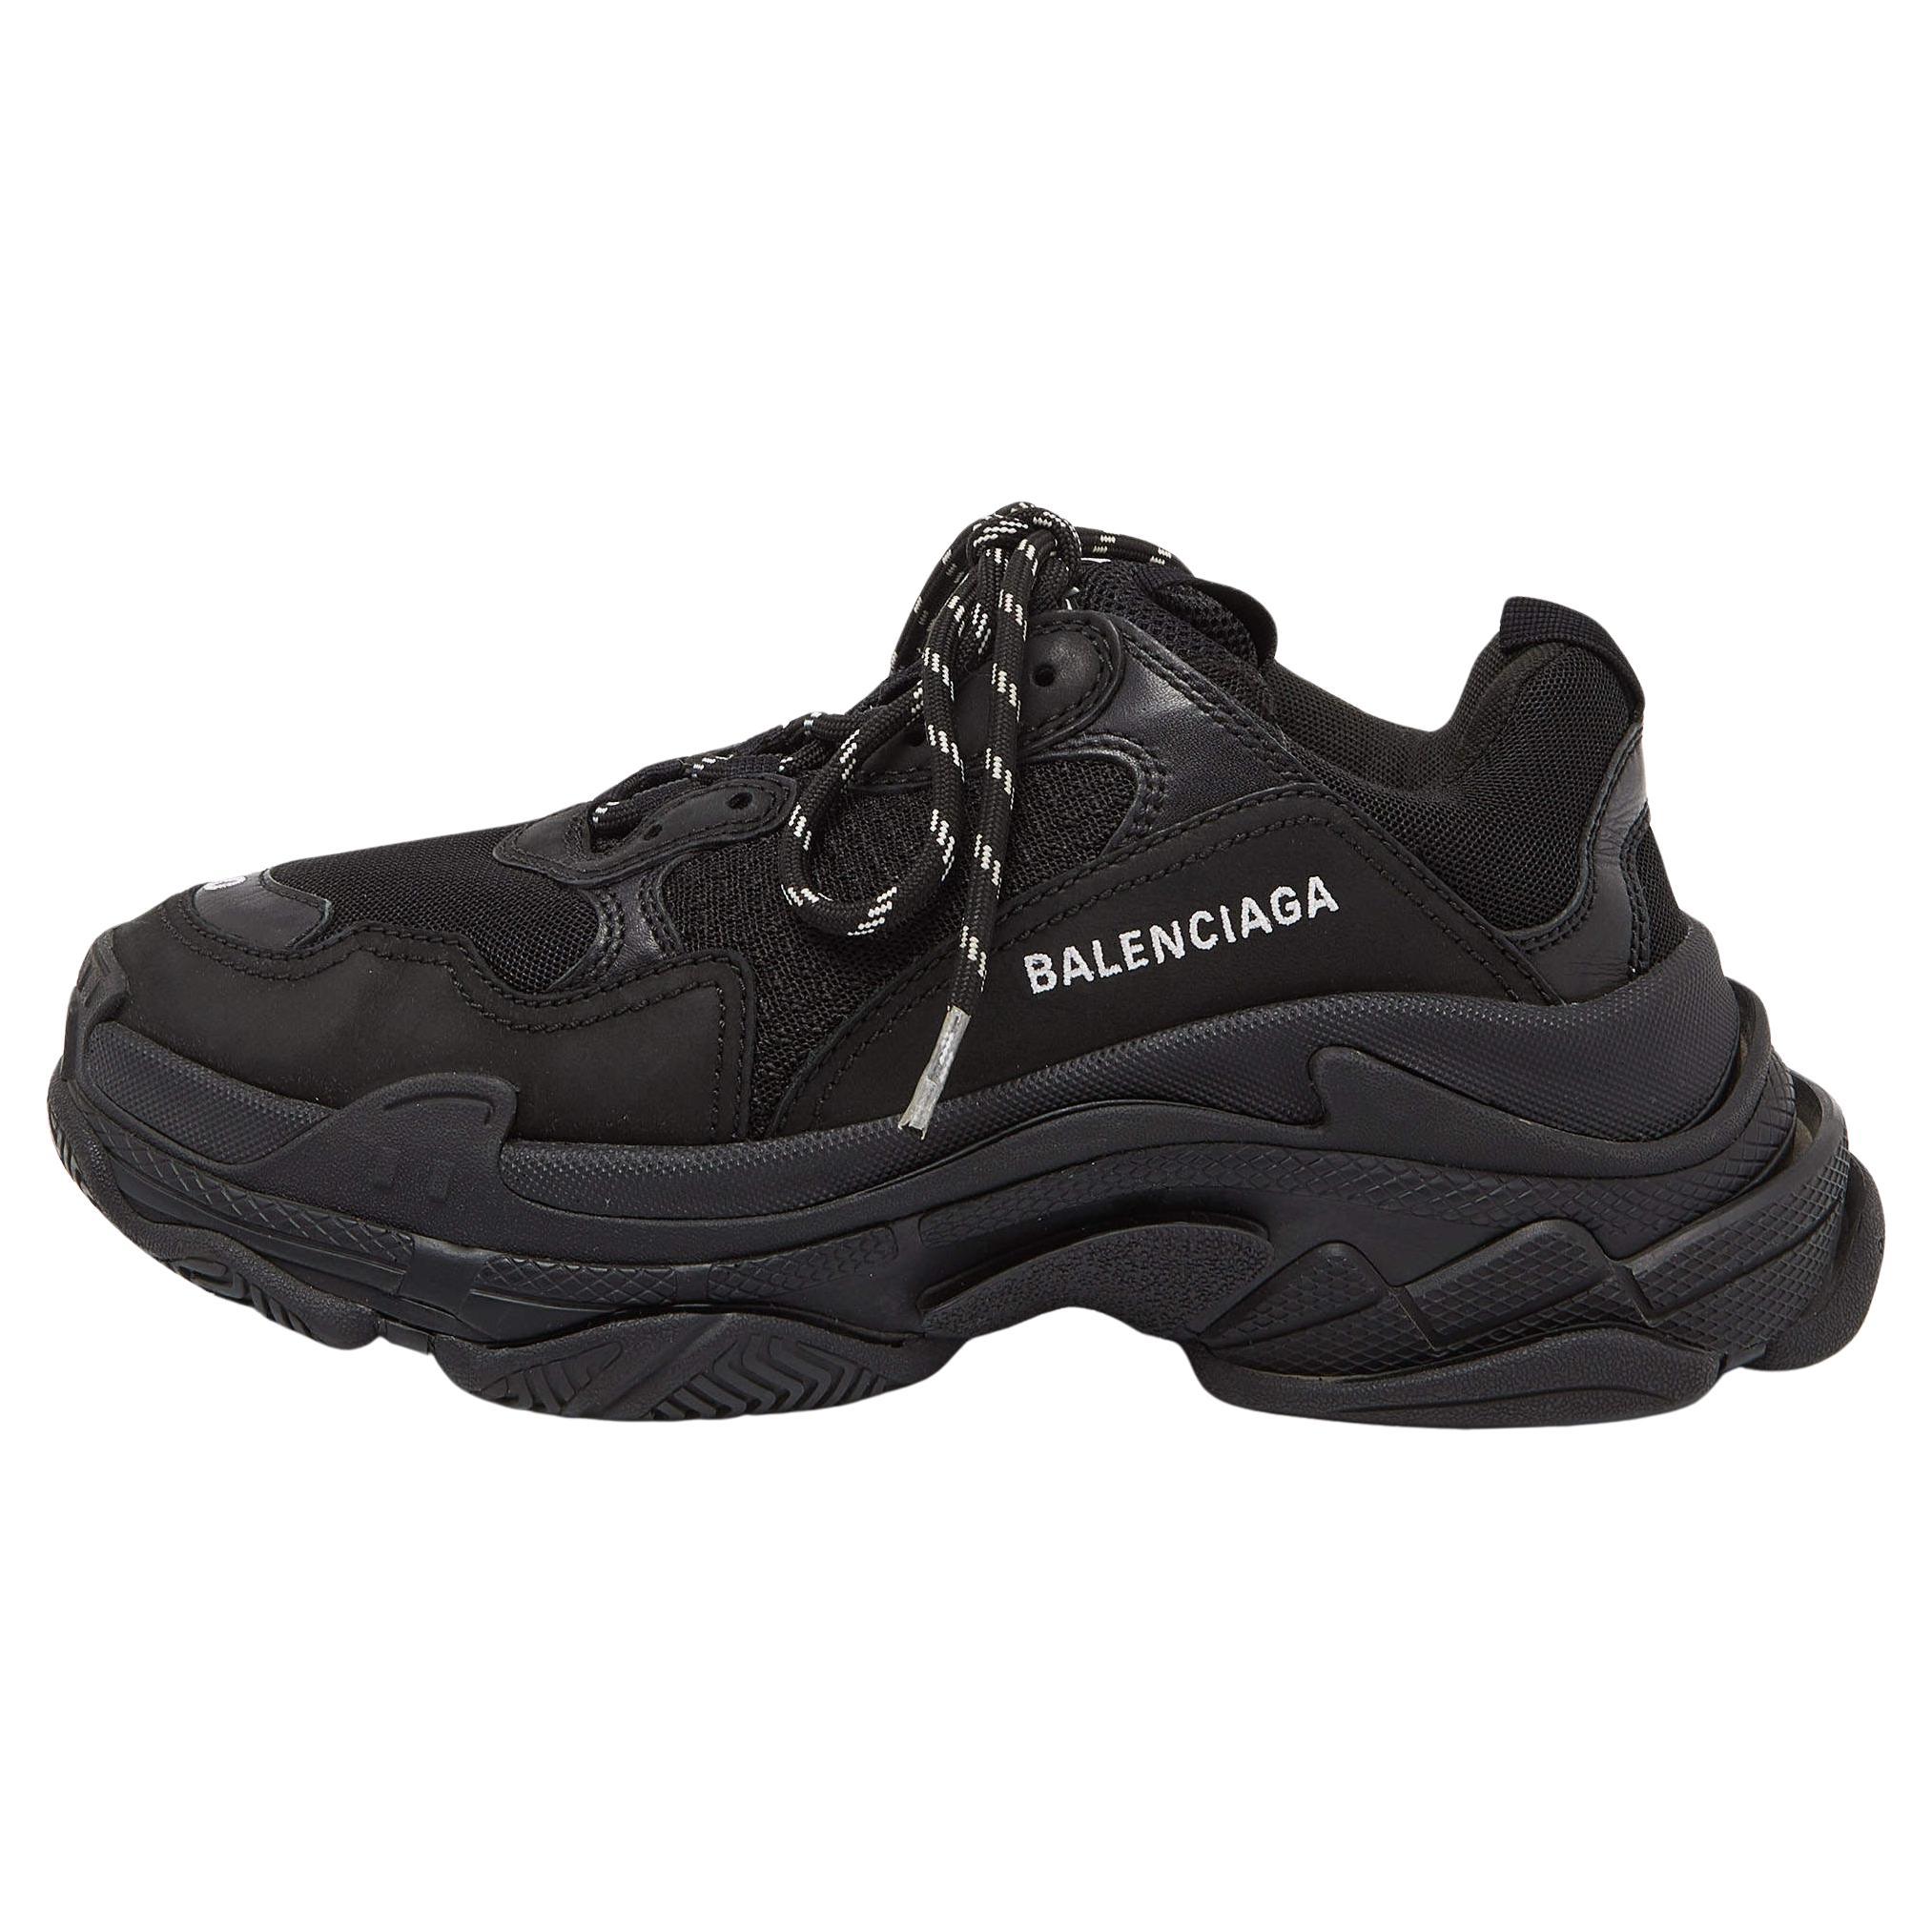 Balenciaga Black Leather and Mesh Triple S Sneakers 